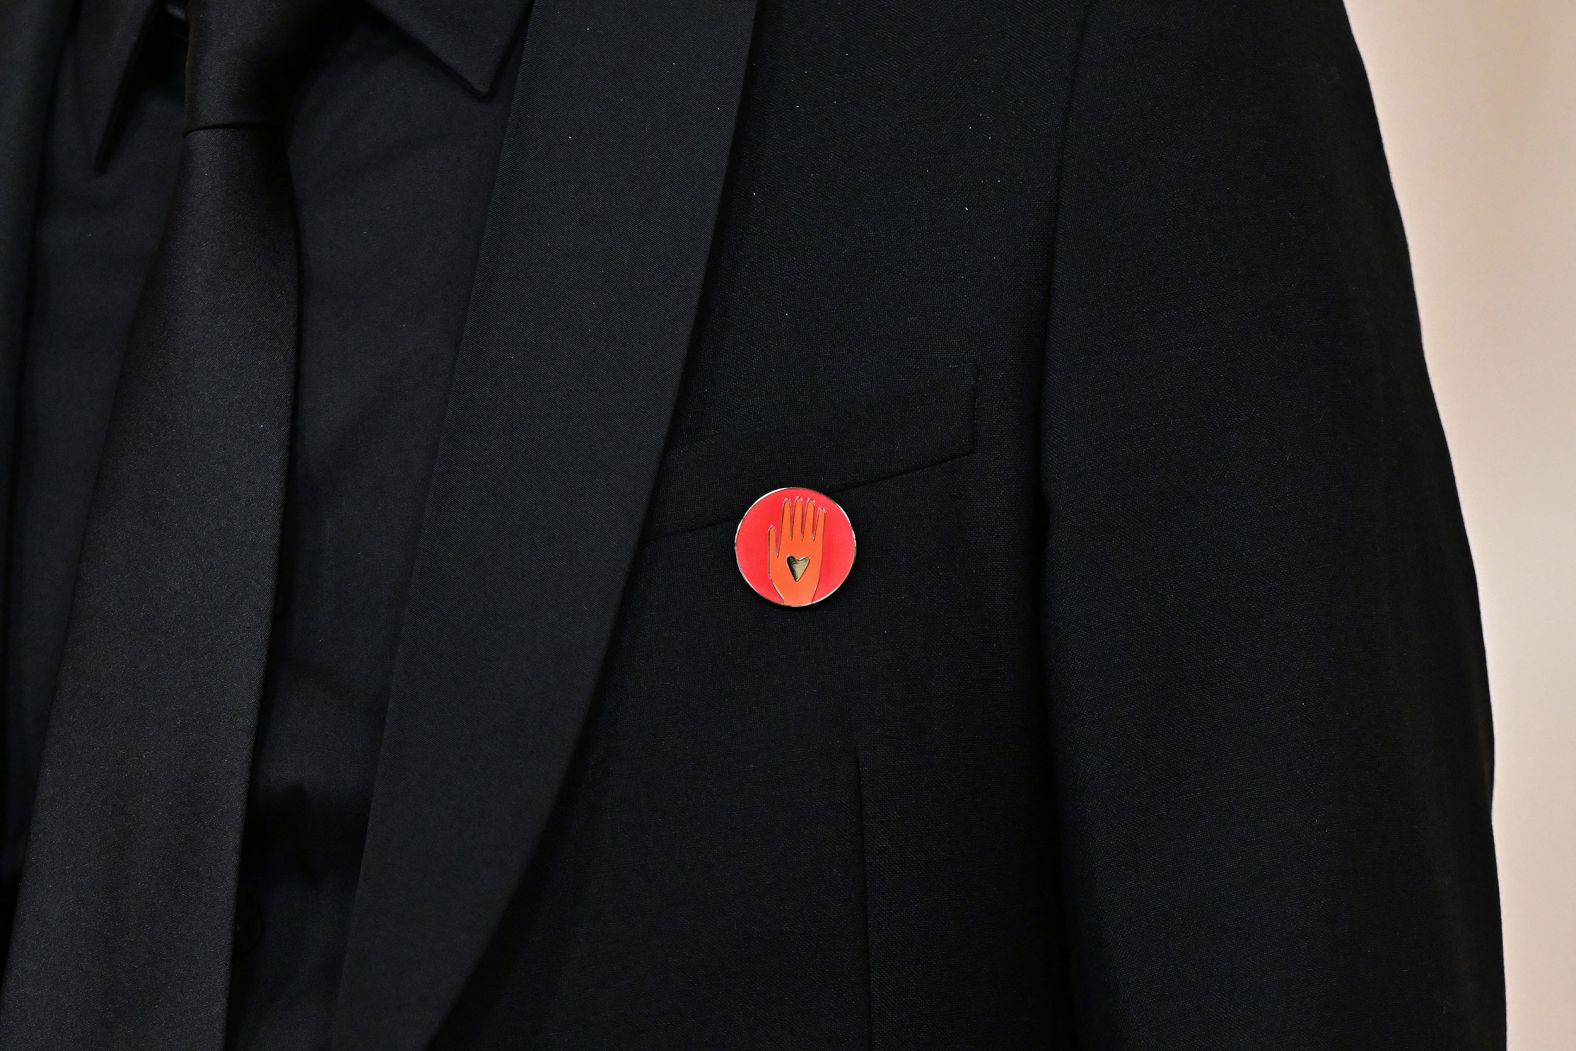 Film producer Nadim Cheikhrouha wears a red lapel pin on the red carpet. The same pin was also seen on Ramy Youssef, Mark Ruffalo and Billie Eilish. <a href="index.php?page=&url=https%3A%2F%2Fwww.cnn.com%2Fentertainment%2Flive-news%2Foscars-academy-awards-03-10-24%2Fh_e1d87d22f44731c0aefccb26fe997660" target="_blank">The pins call for a ceasefire</a> in the Israel-Hamas war.